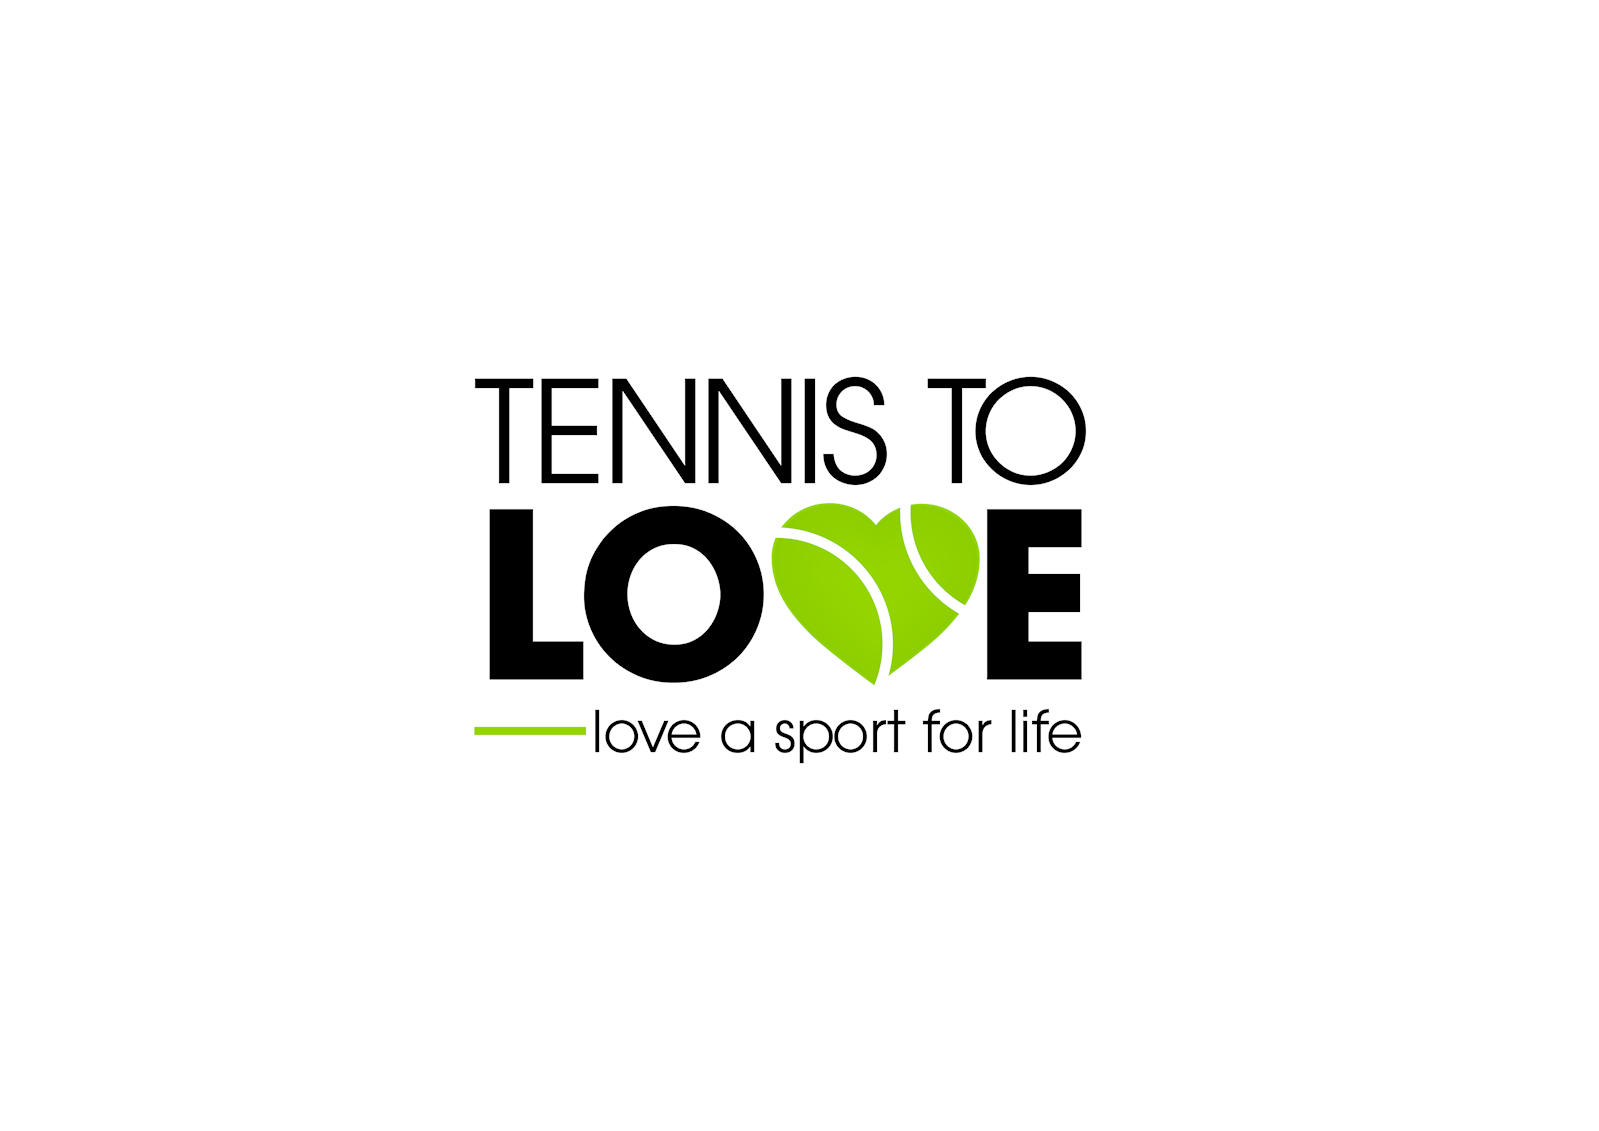 Tennis to Love